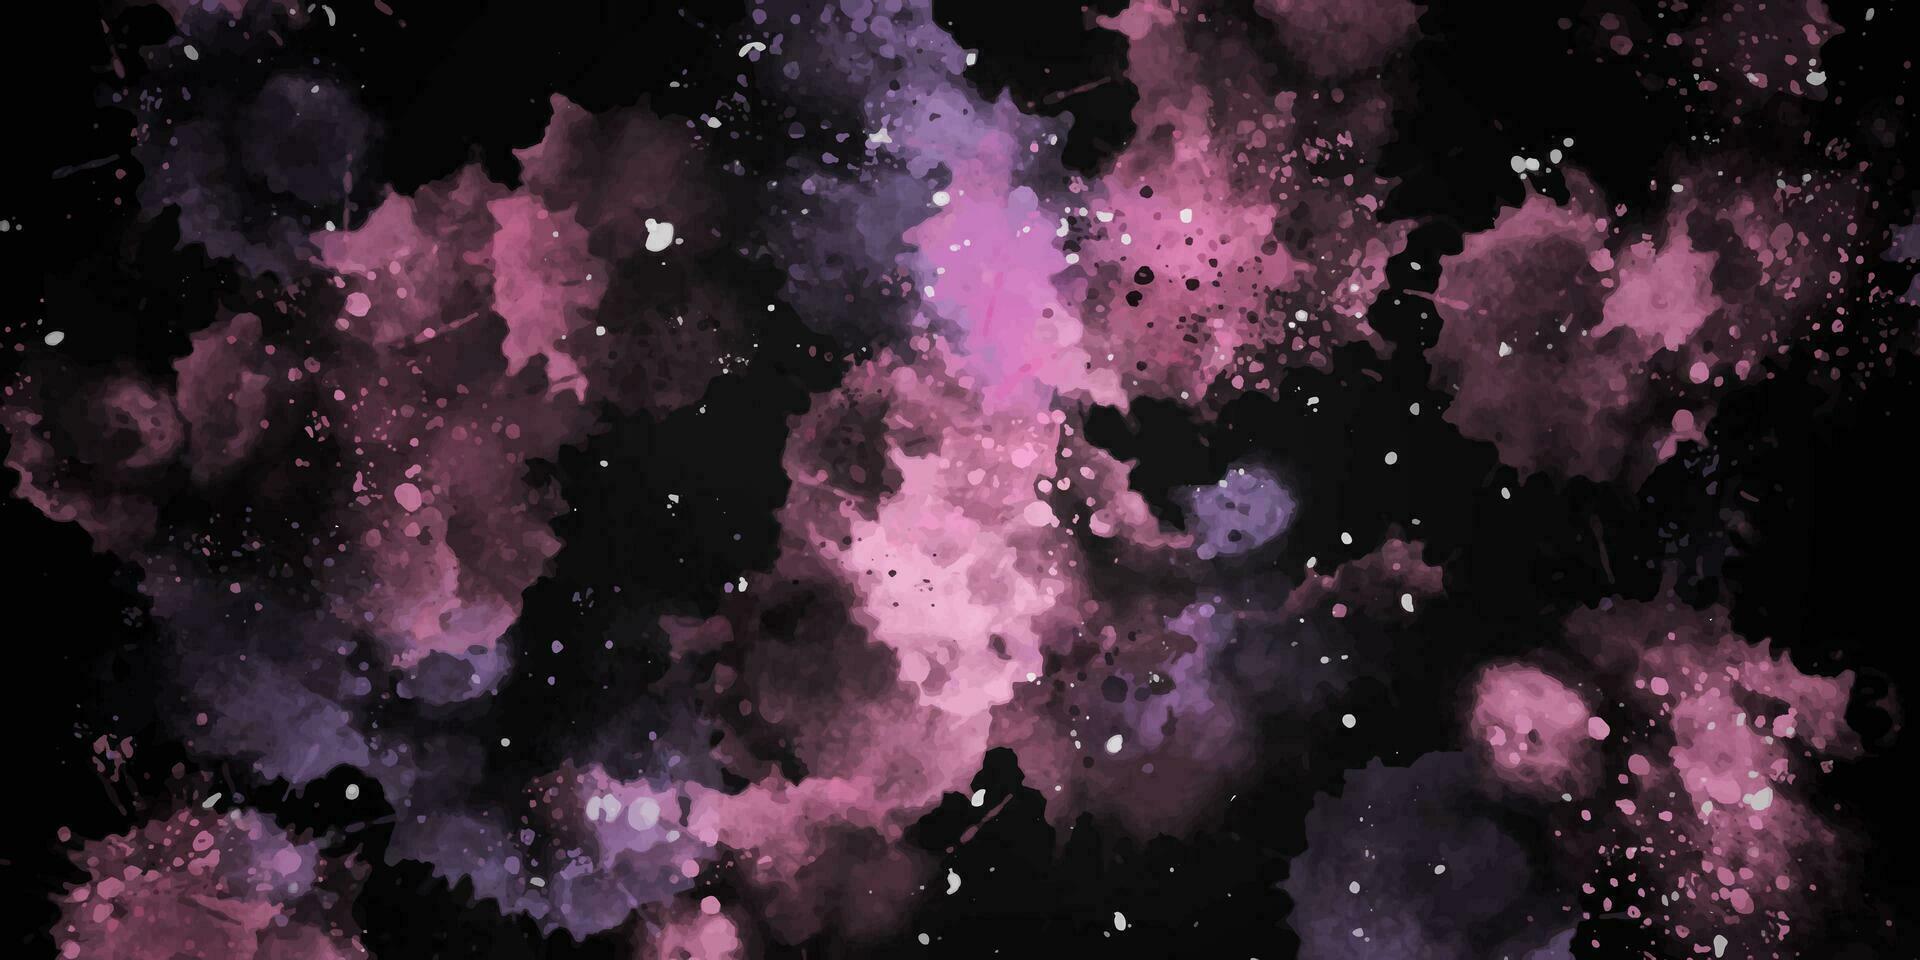 Abstract dark background. Watercolor splashes, drops. Pink and purple tones vector